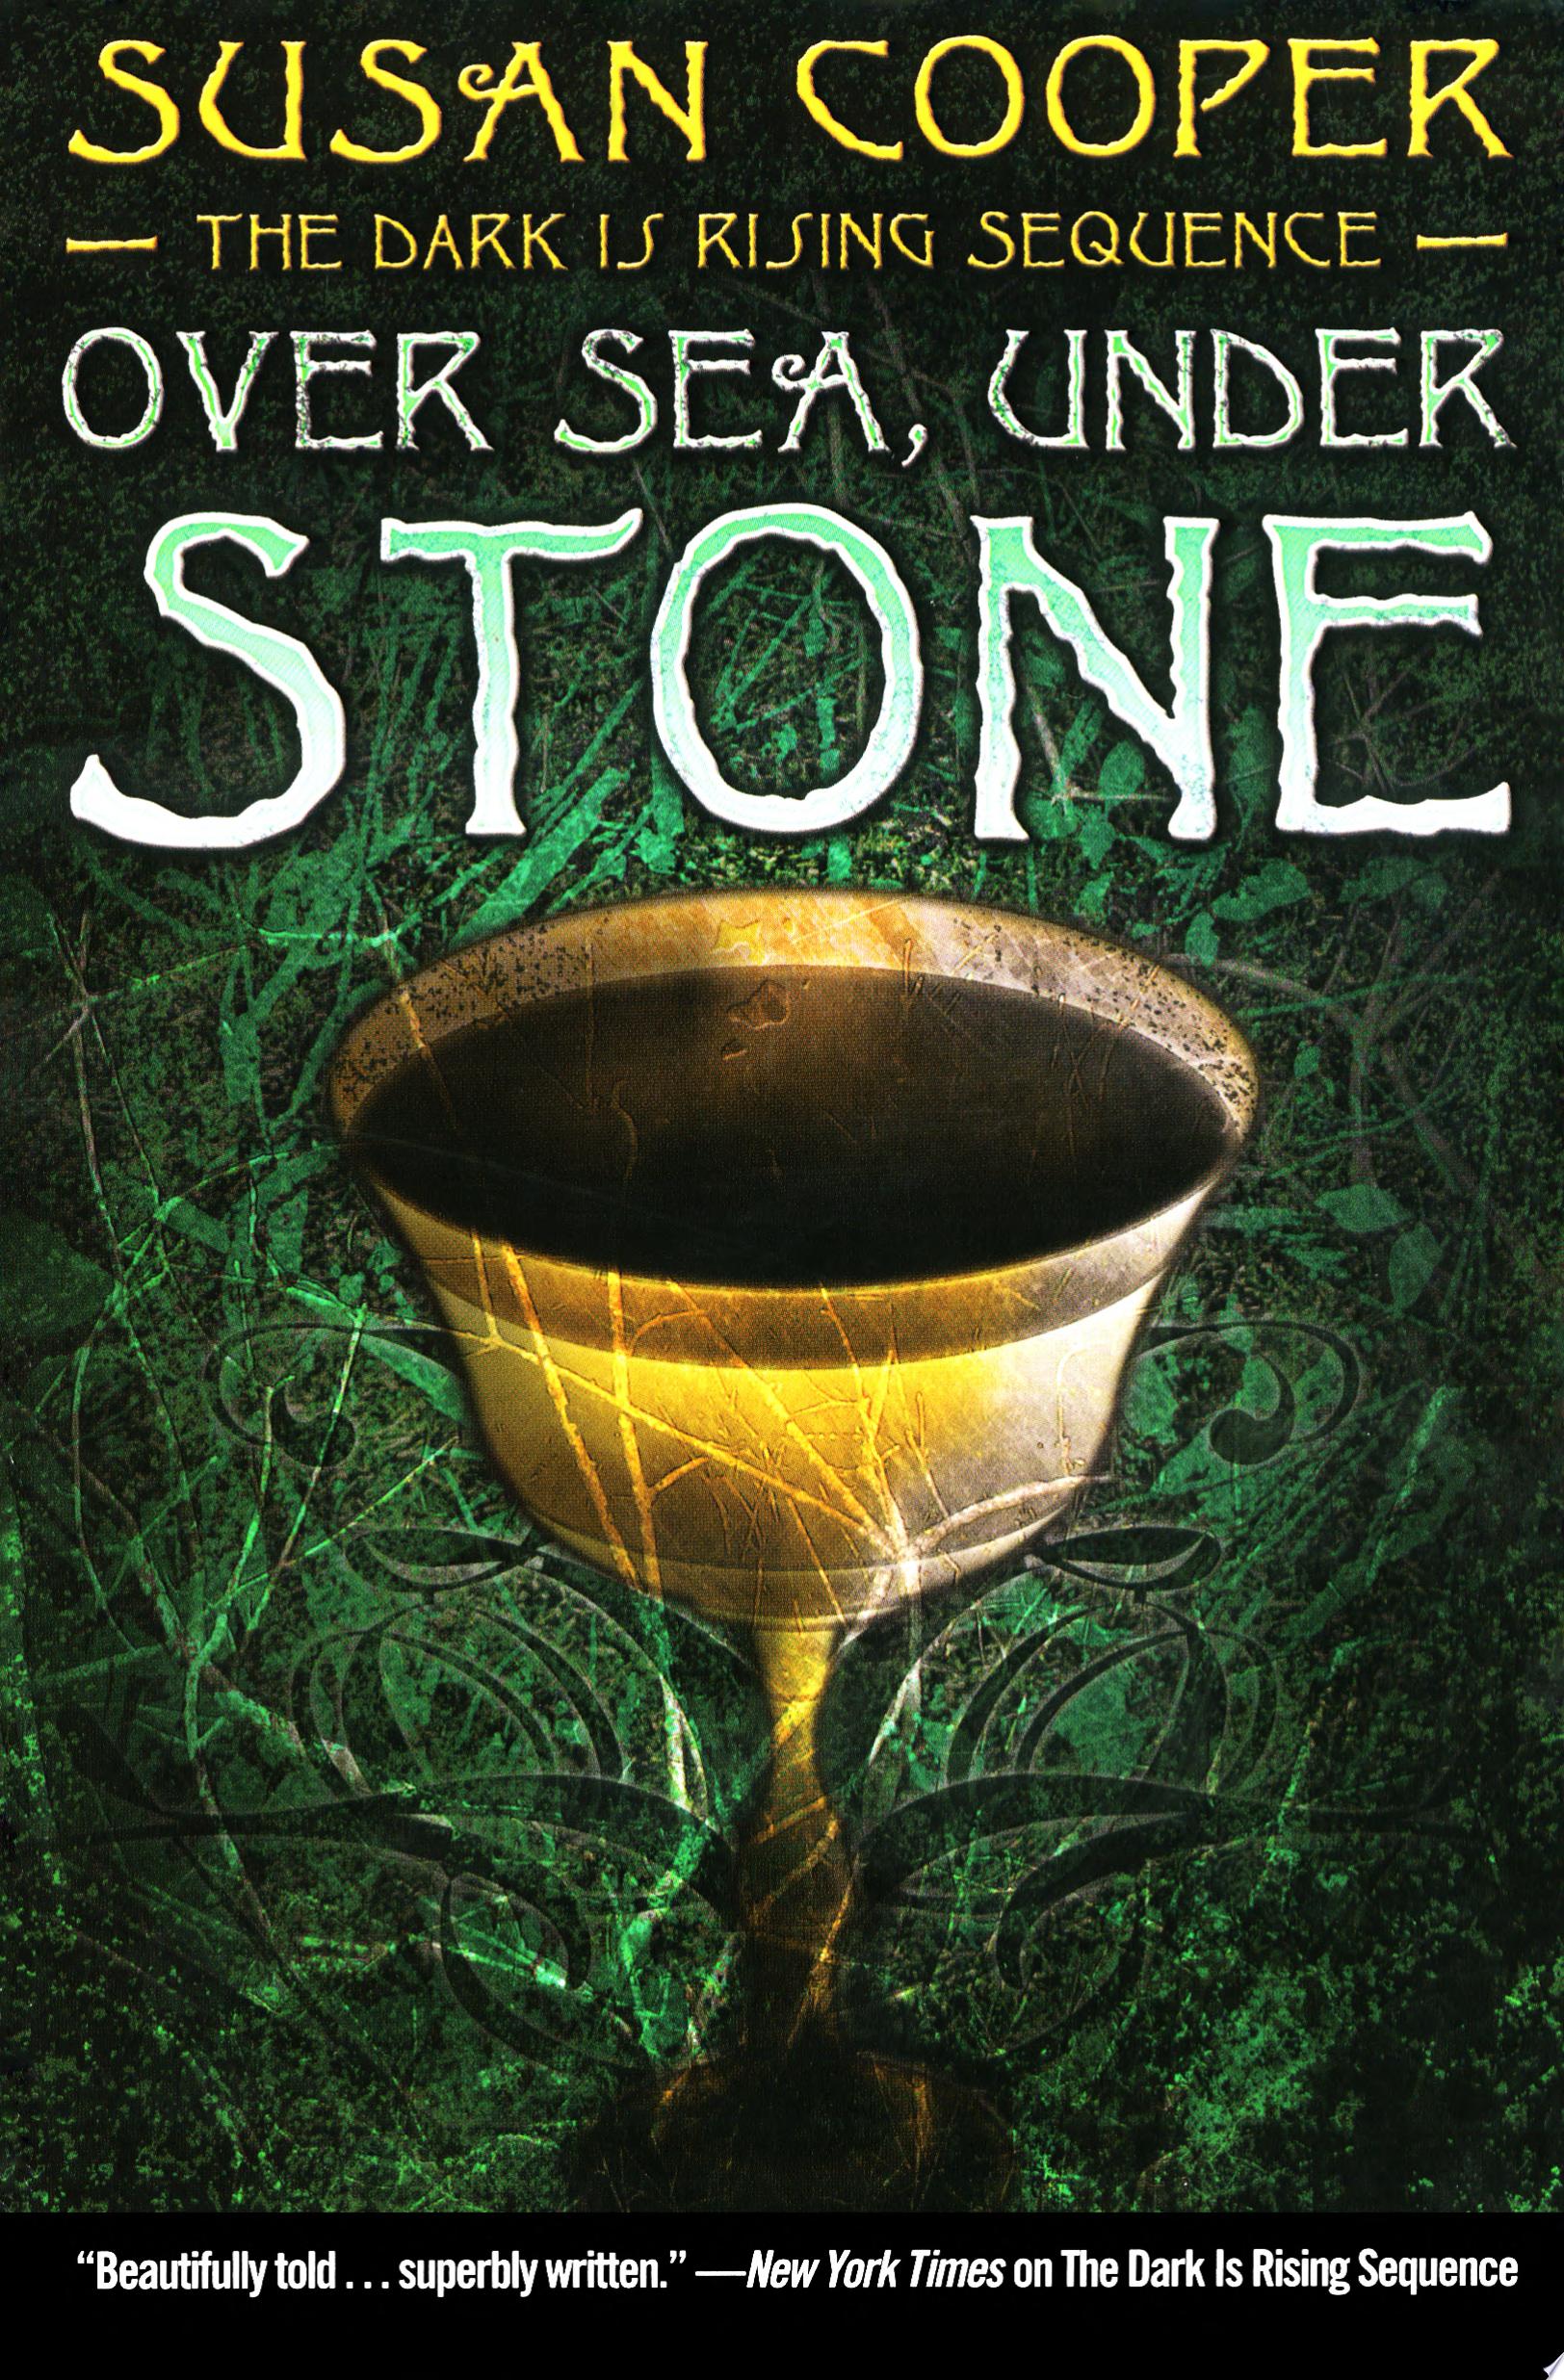 Image for "Over Sea, Under Stone"